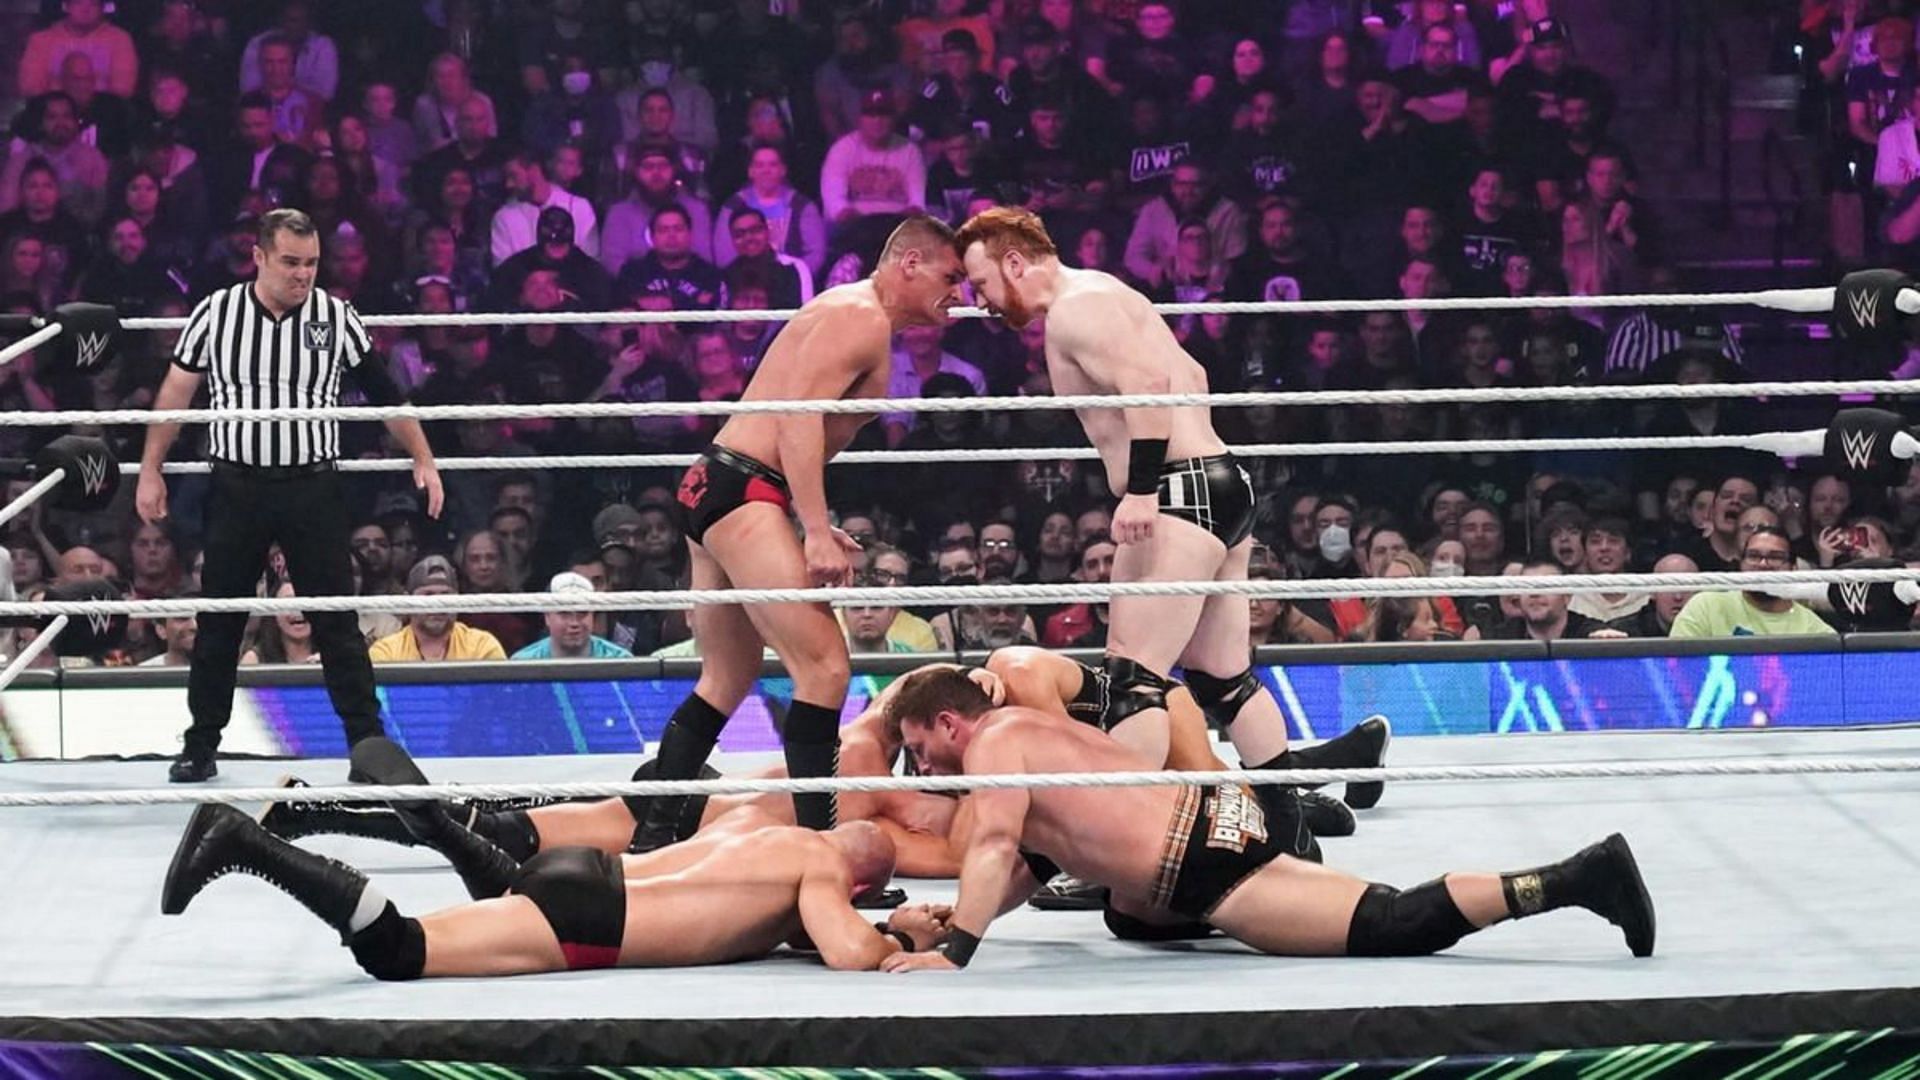 Sheamus and Gunther butting heads at Extreme Rules (Source: WWE.com)